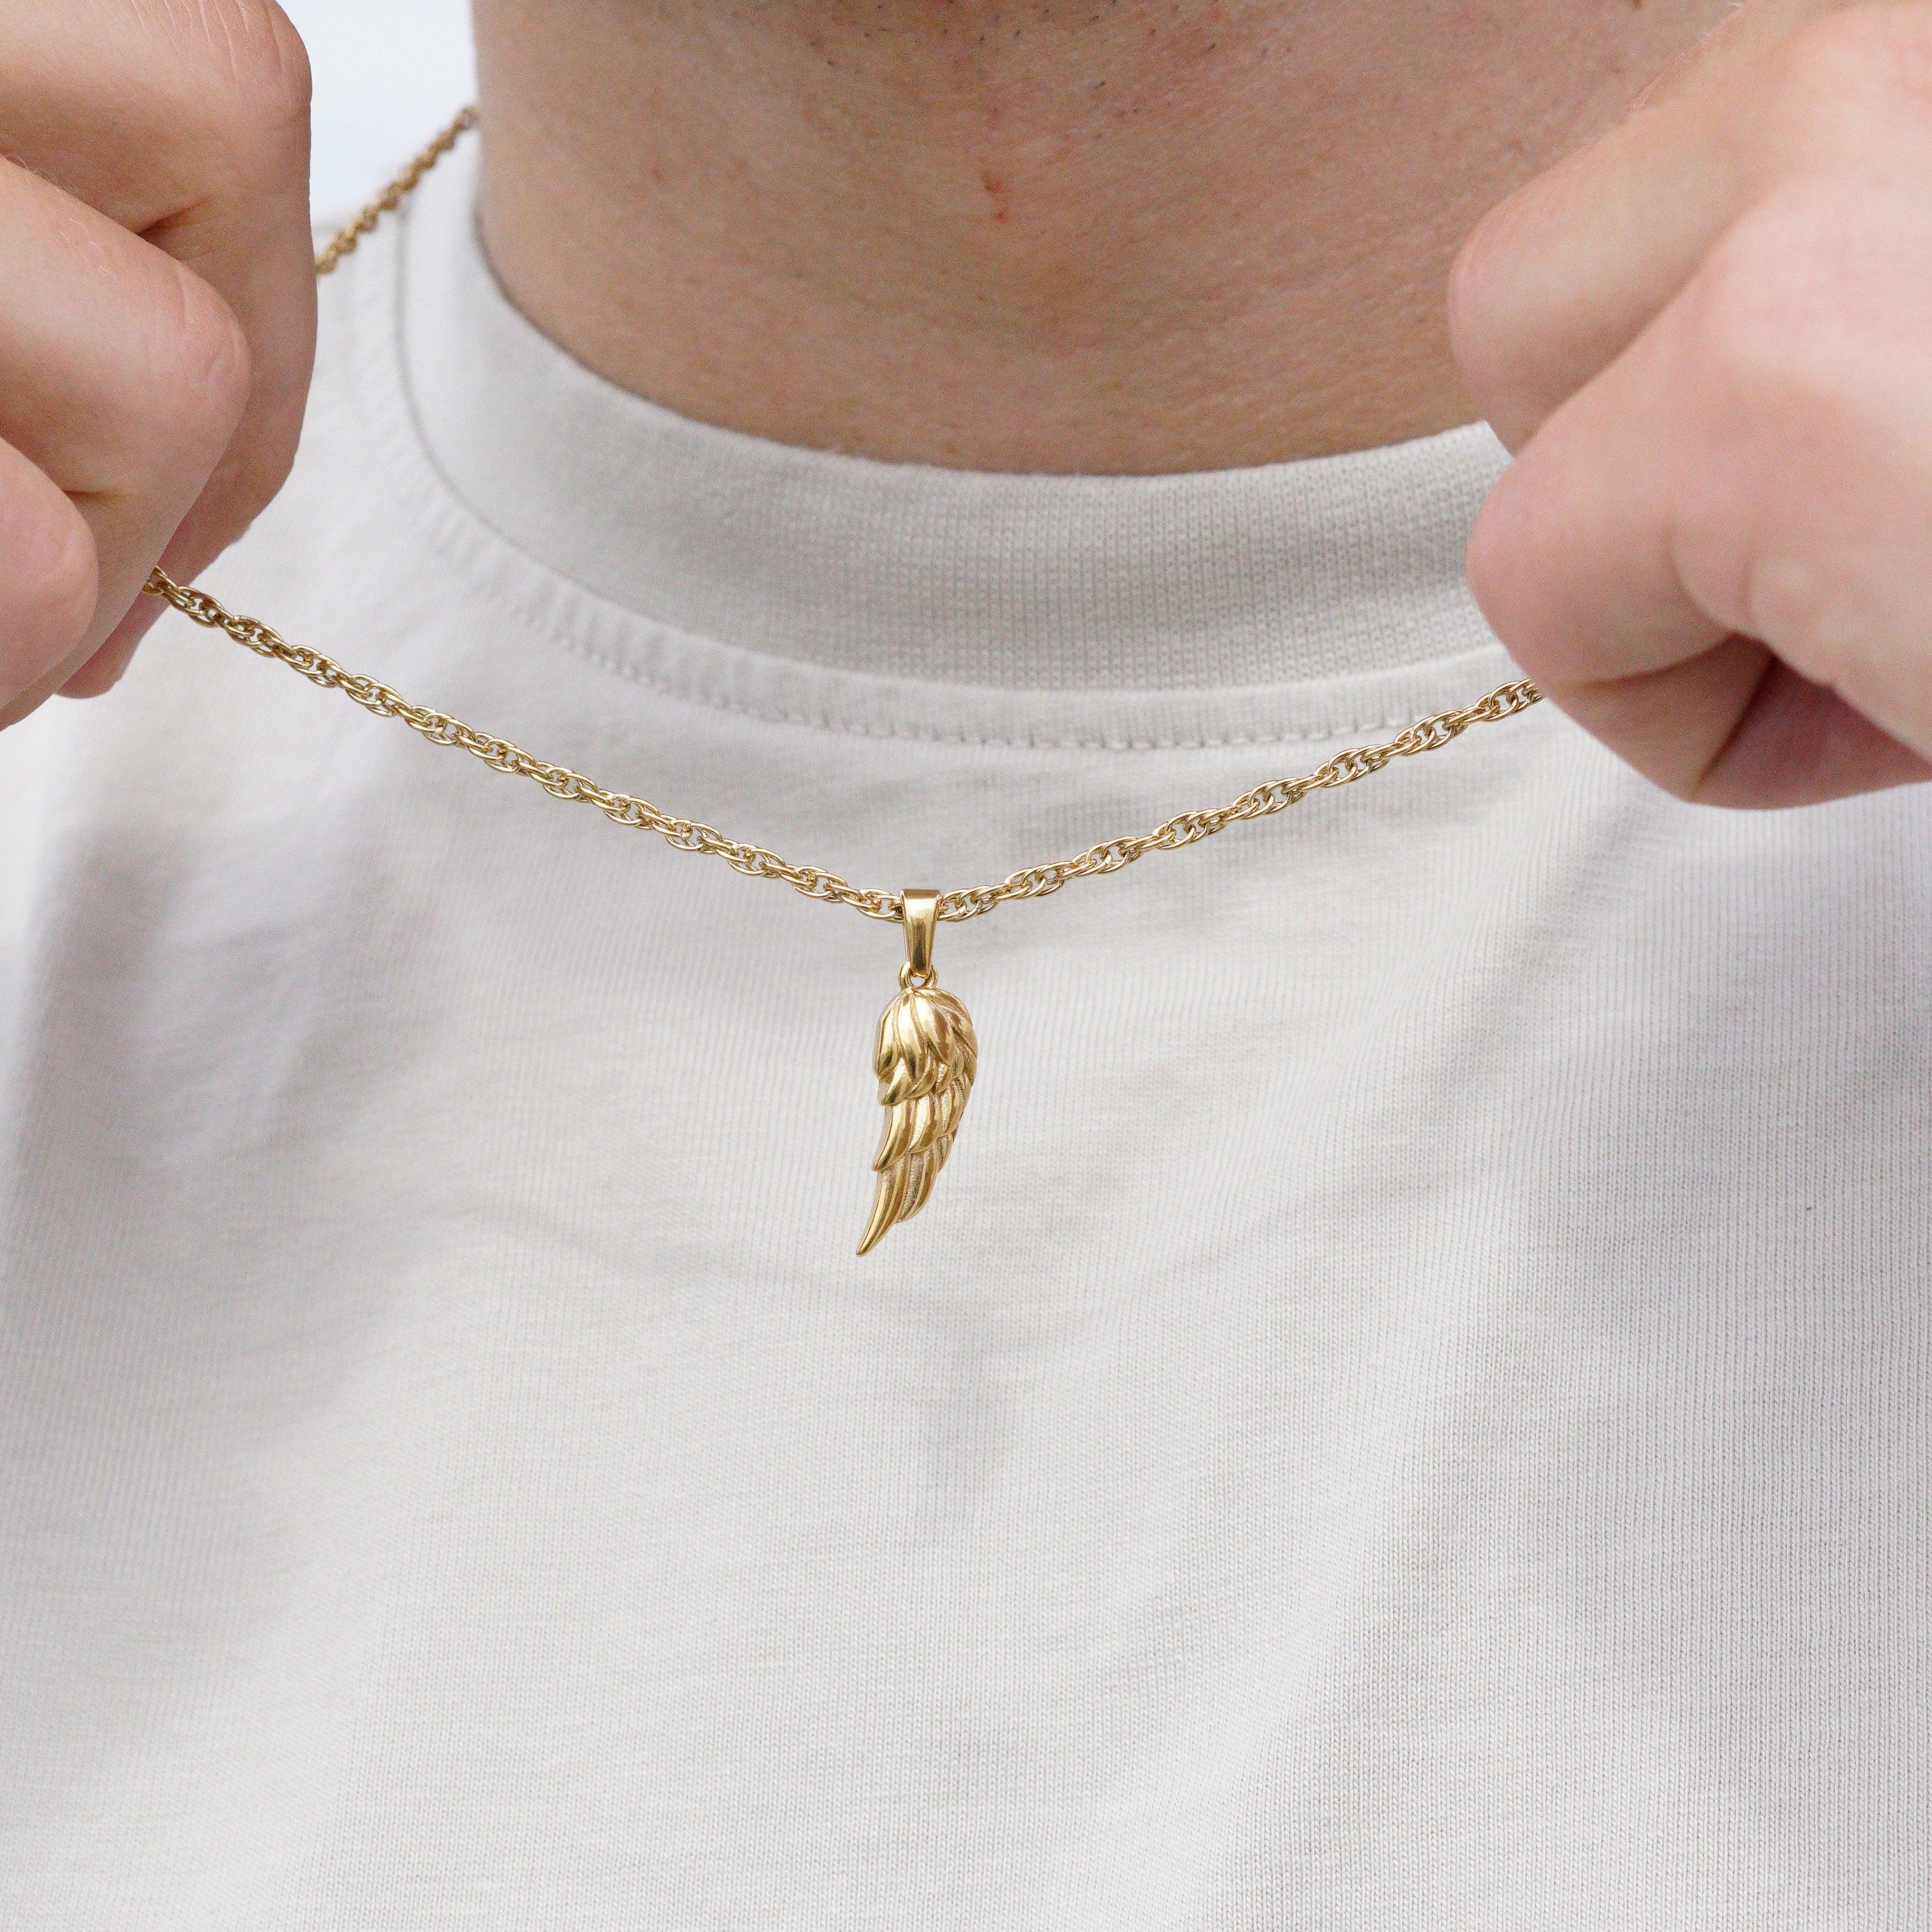 WING NECKLACE - GOLD TONE